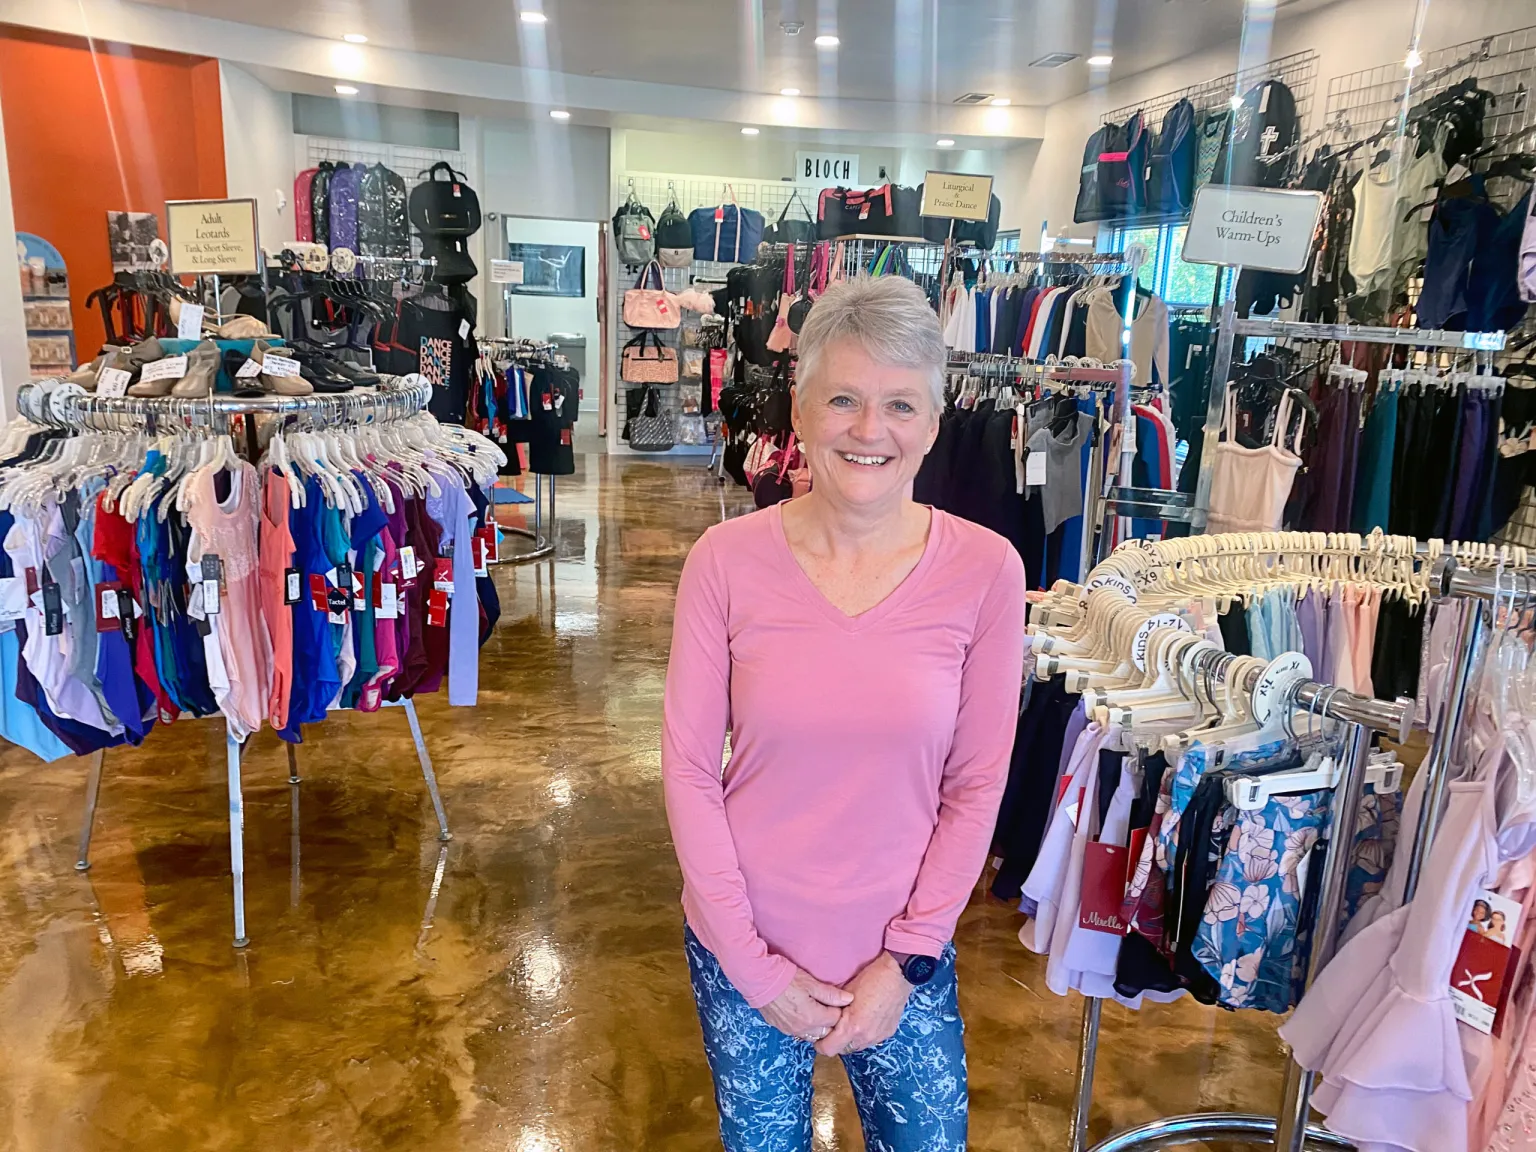 Storeowner Coleen Strasburger of The Turning Pointe poses in her store.